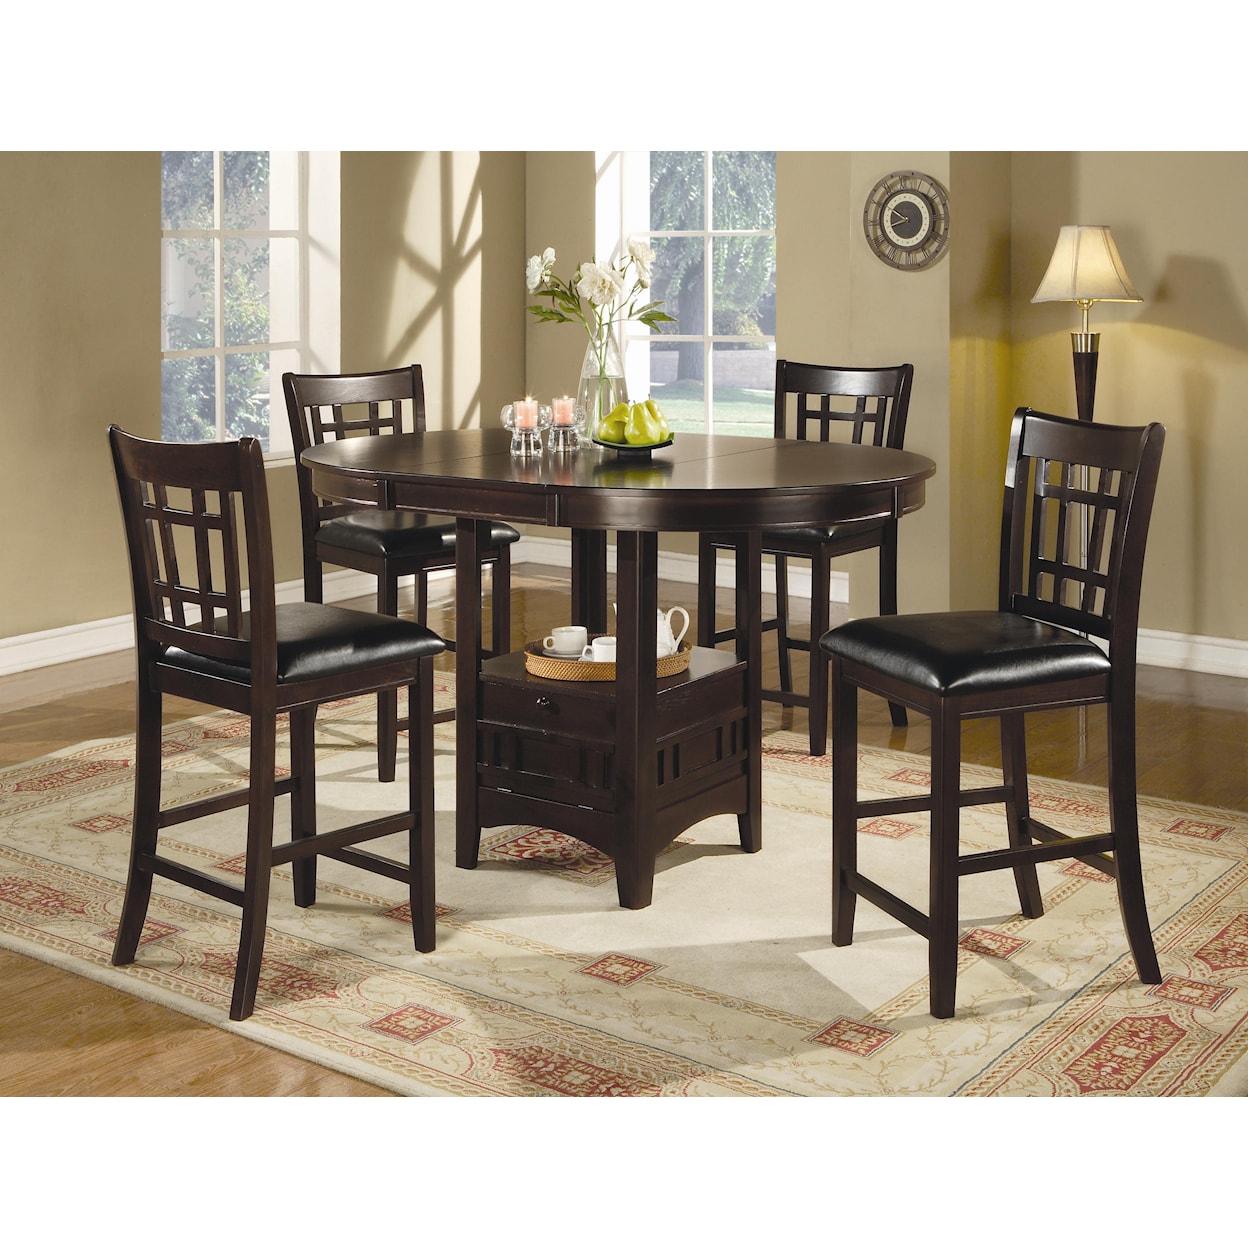 Coaster Lavon 5pc Dining Room Group